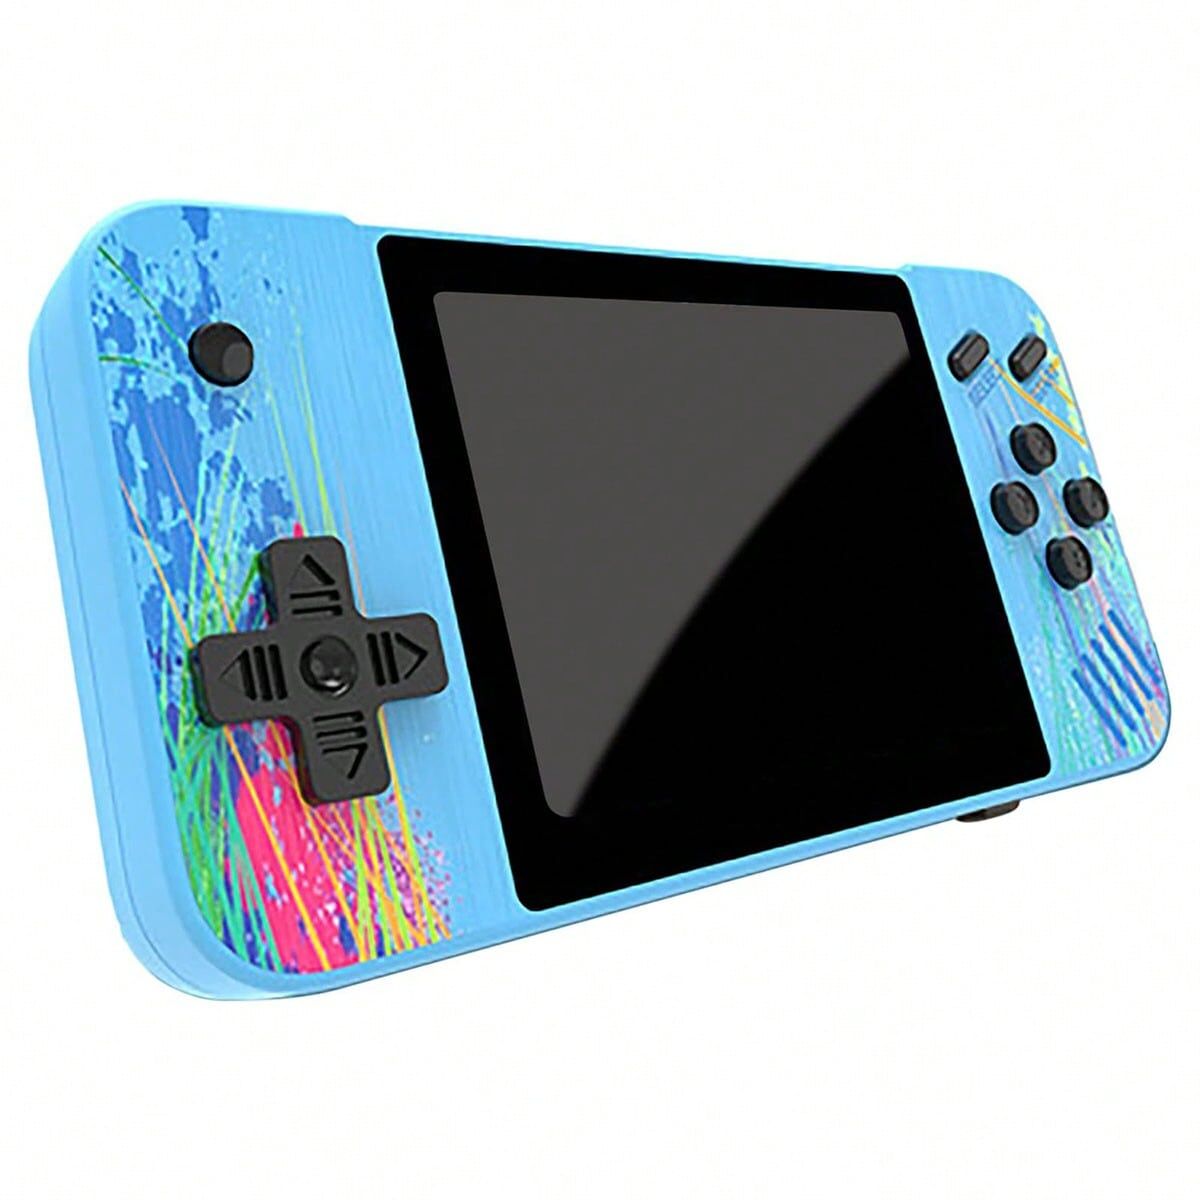 SHEIN G3 Handheld Game Console With Horizontal Screen, Retro Arcade, Single And Double Player,3.5-Inch Large Screen Game Console Blue Single Style,Double Style